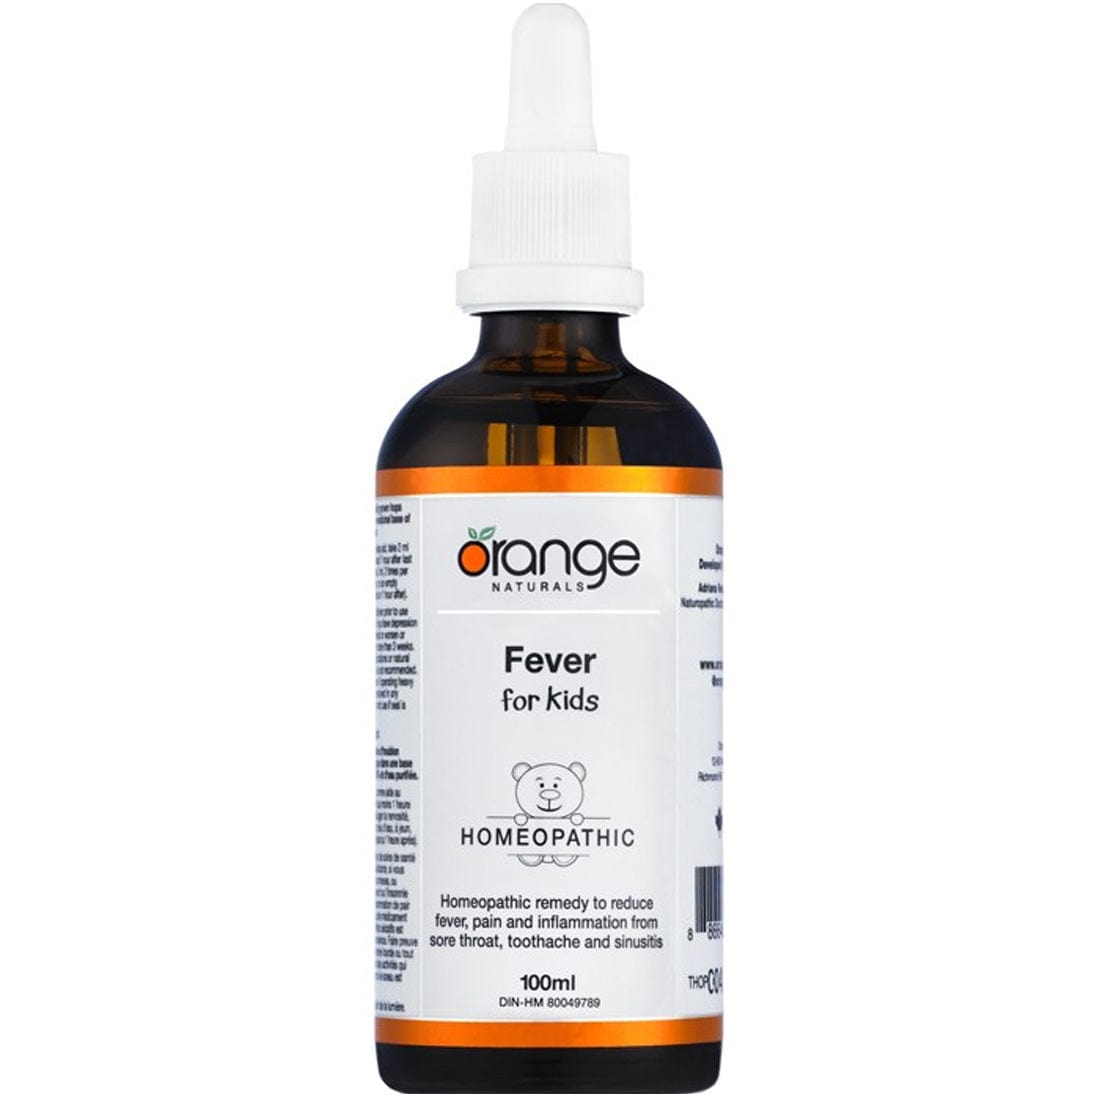 Orange Naturals Fever (for kids) Homeopathic Remedy, 100ml